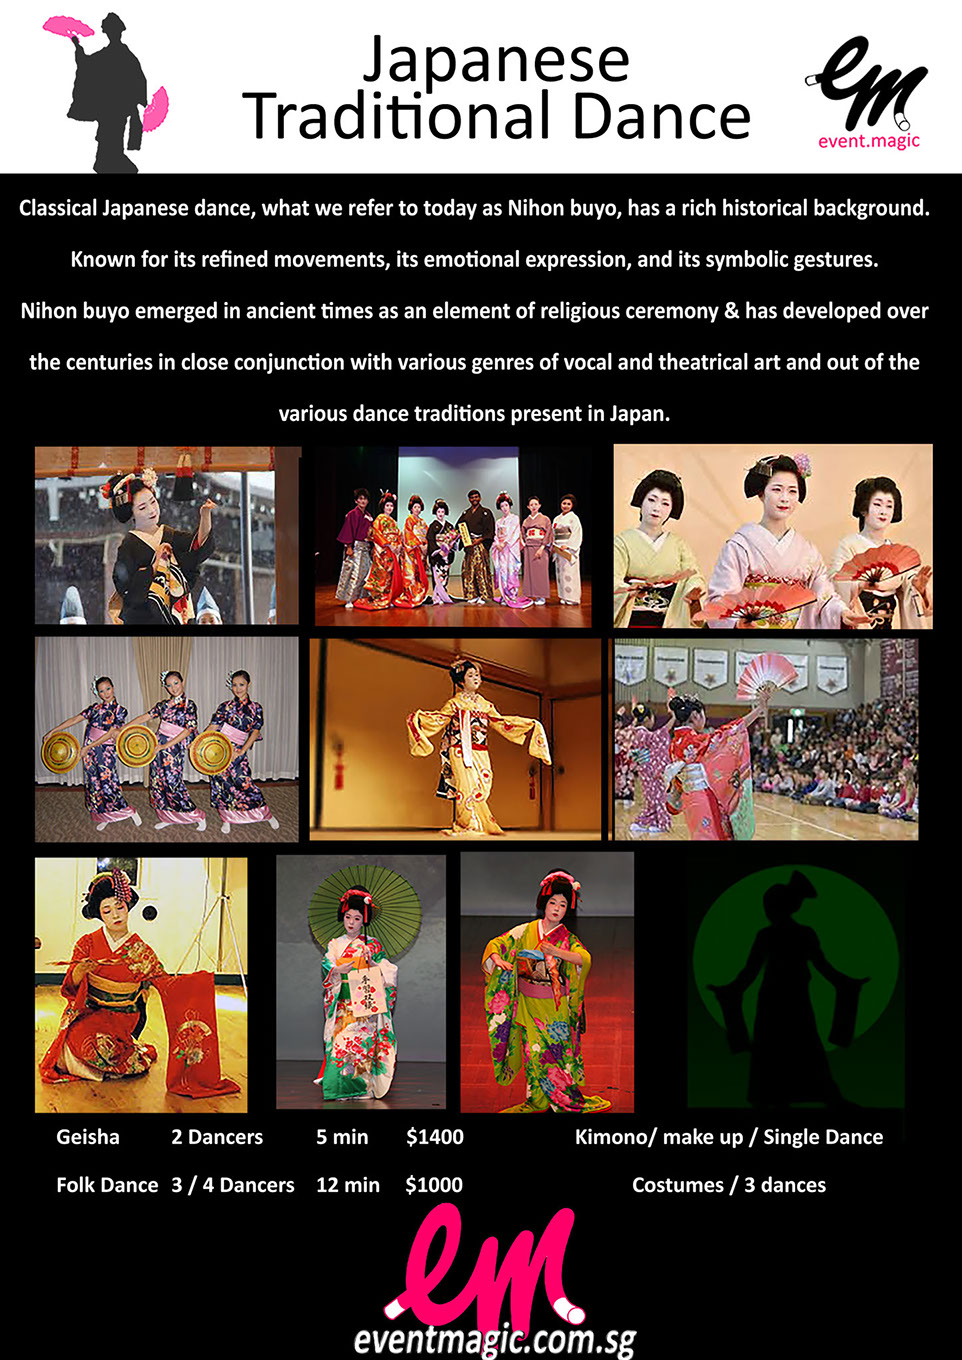 Japanese Dancers for hire Singapore, Japan traditional dancers Singapore